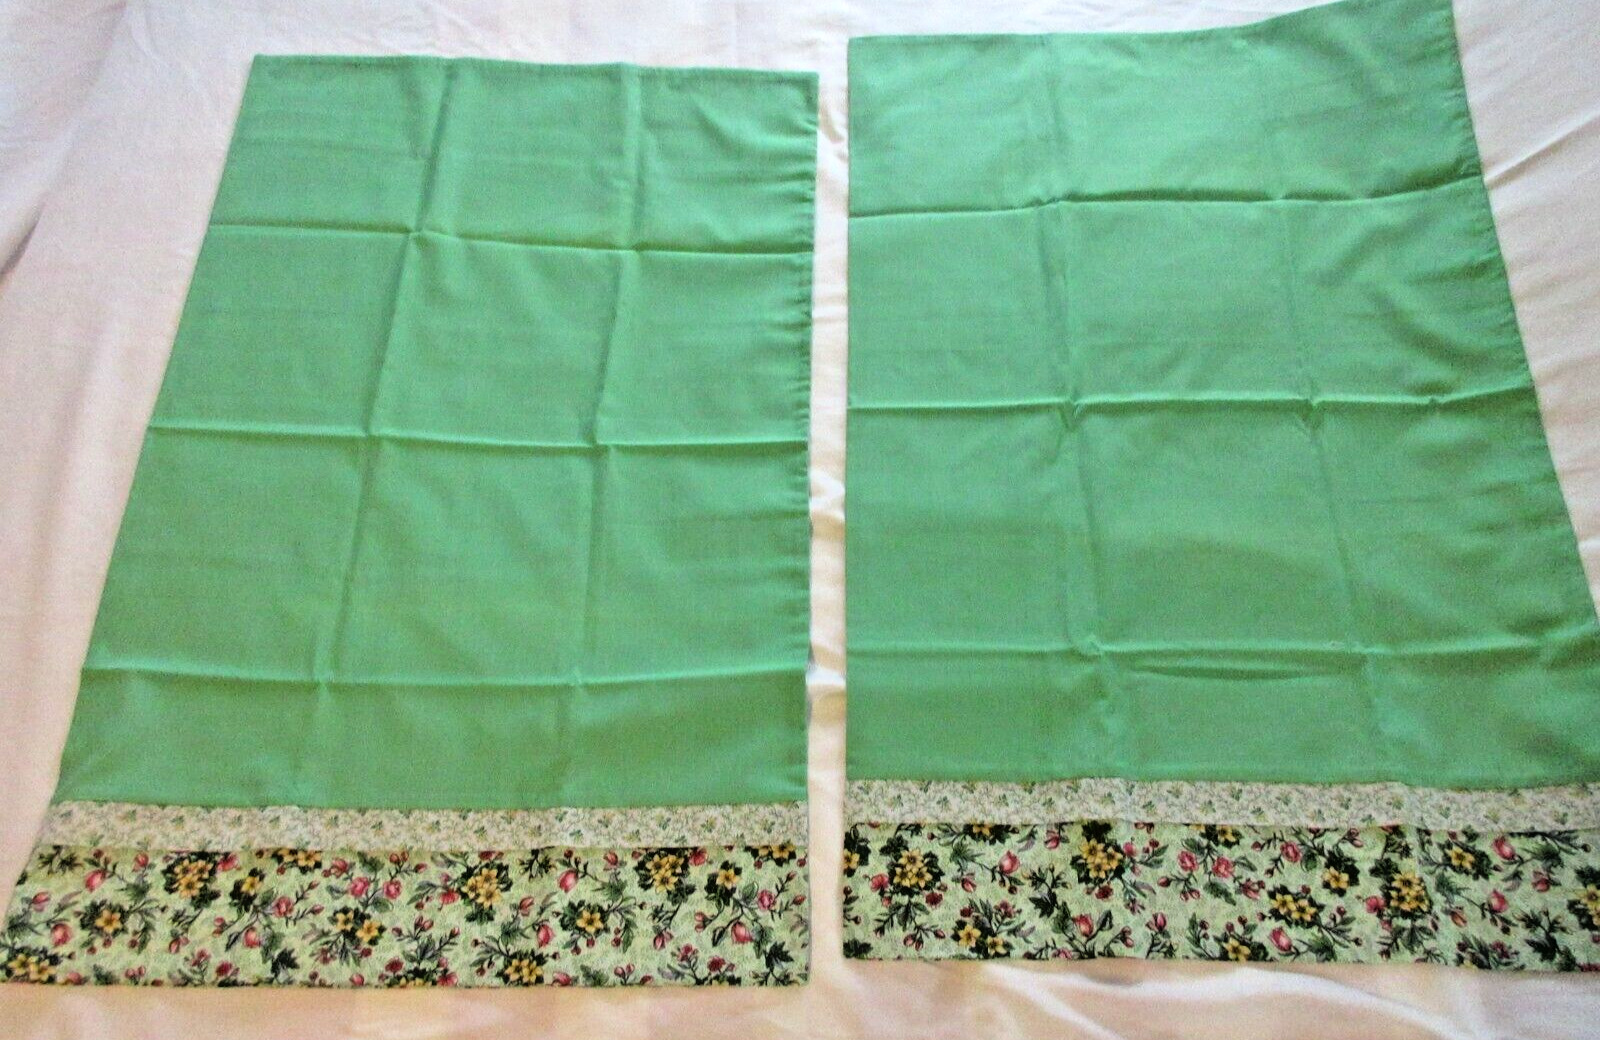 VINTAGE PILLOWCASES PAIR HANDMADE GREEN COLORWAY W FLORAL ACCENT